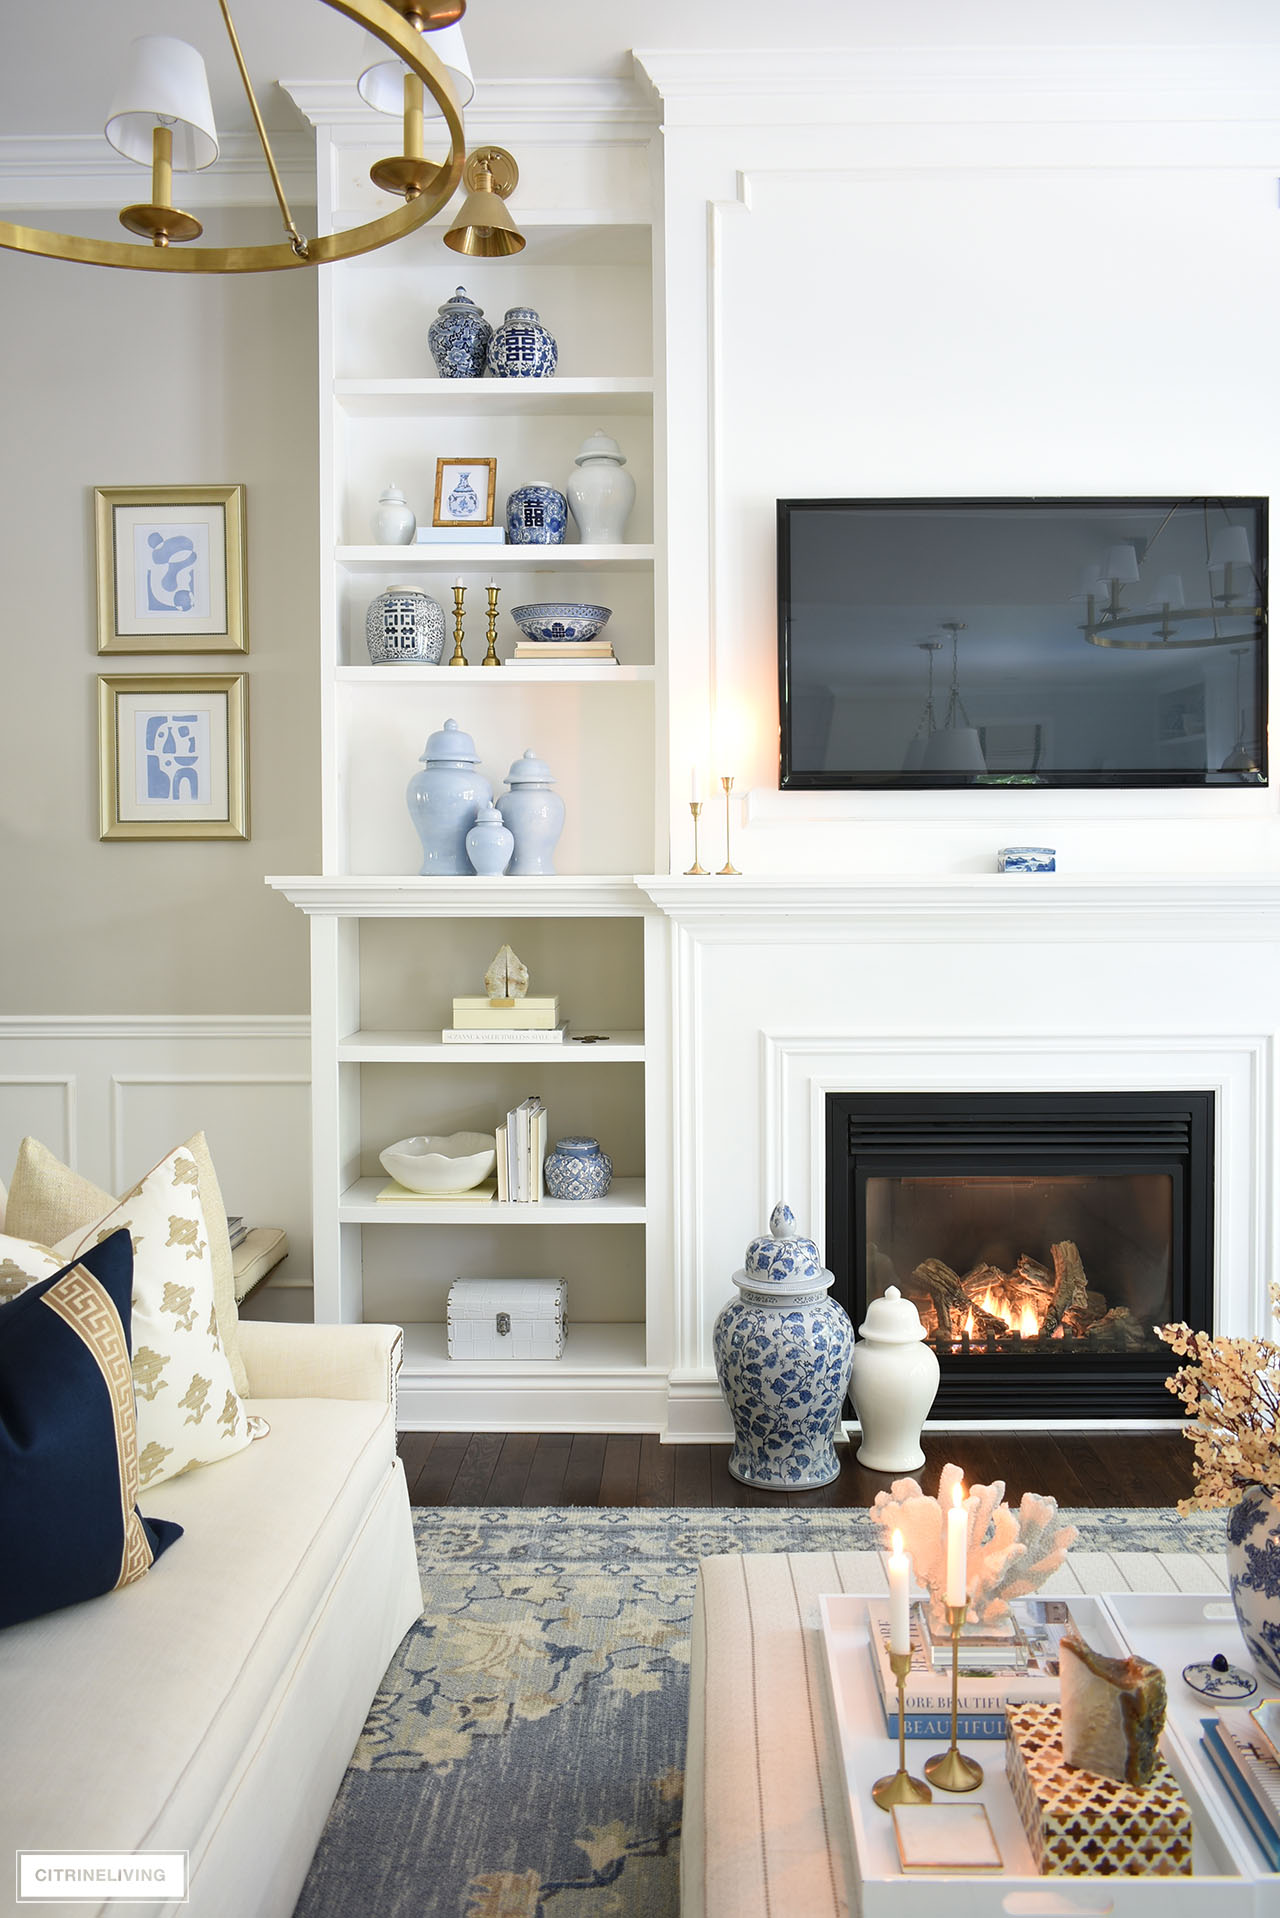 Living room bookshelves decorated for fall with blue, gold, white and natural elements.